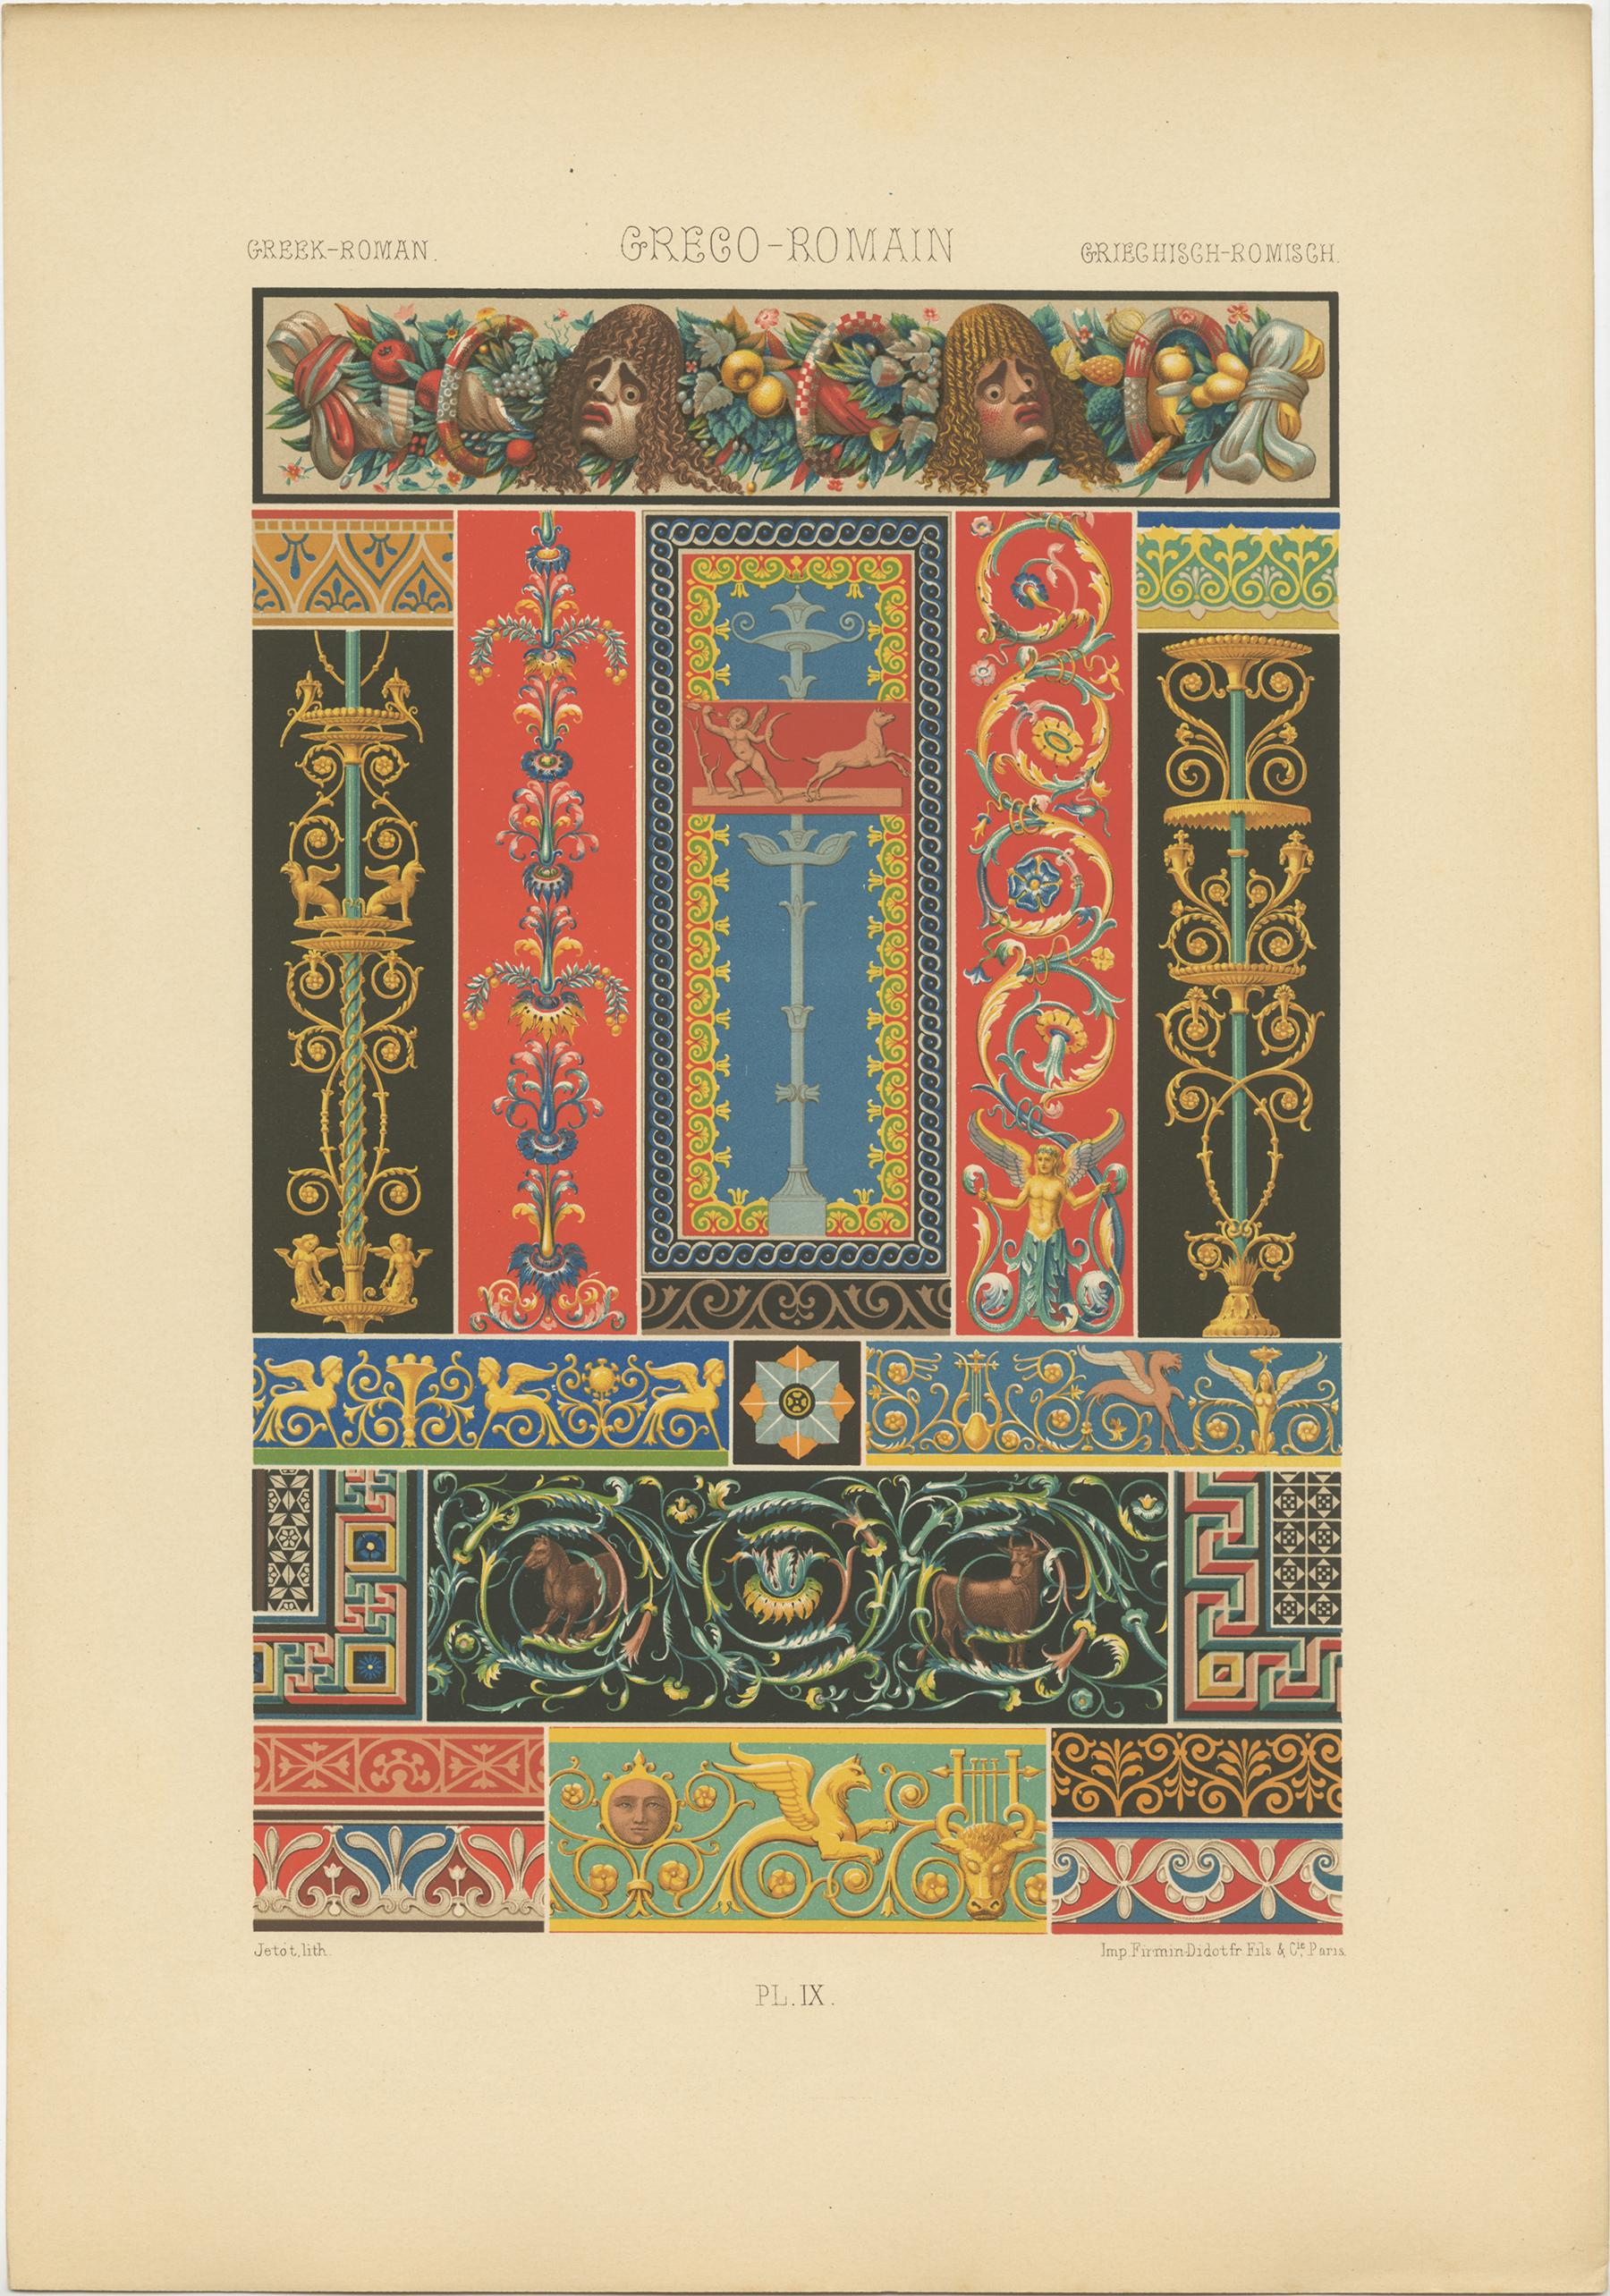 Antique print titled 'Greek, Roman - Greco, Romain - Greighisch, Romisch'. Chromolithograph of Greek - Roman ornaments and decorative arts. This print originates from 'l'Ornement Polychrome' by Auguste Racinet. Published, circa 1890.